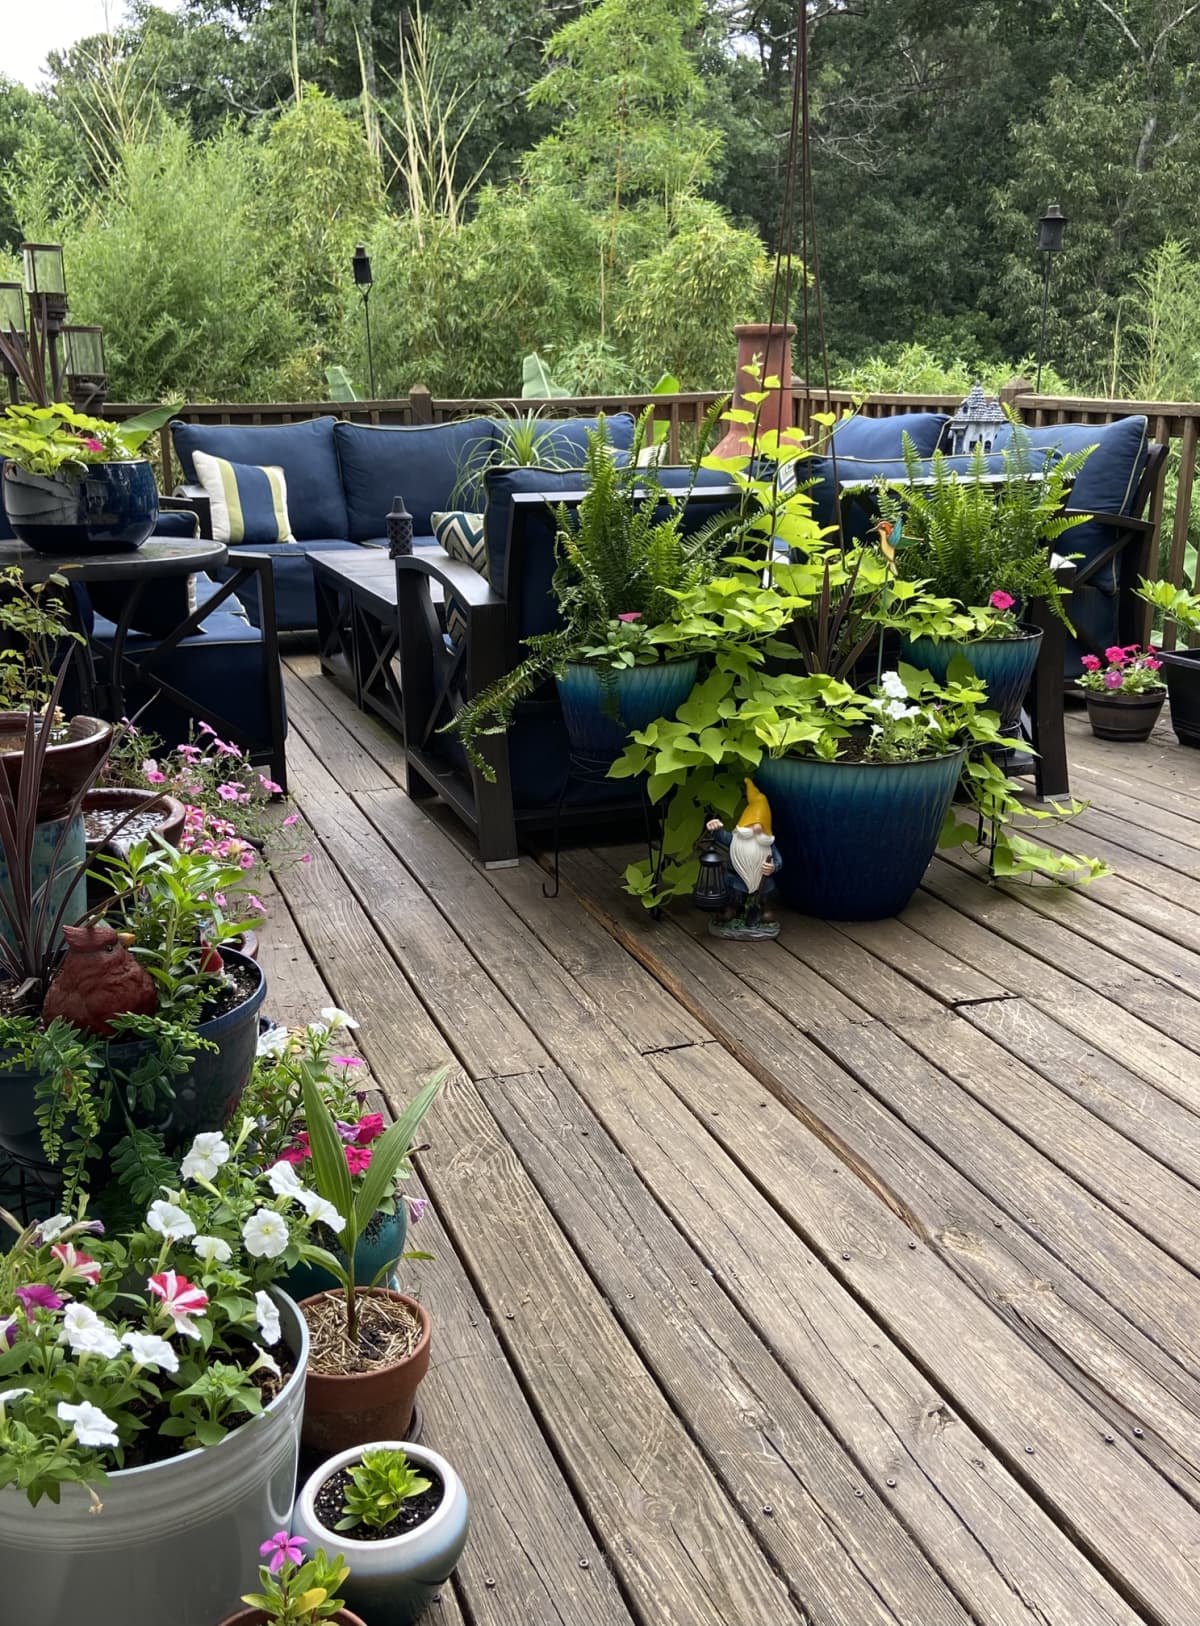 A beautiful outdoor deck full of potted plants in bloom and blue patio furniture